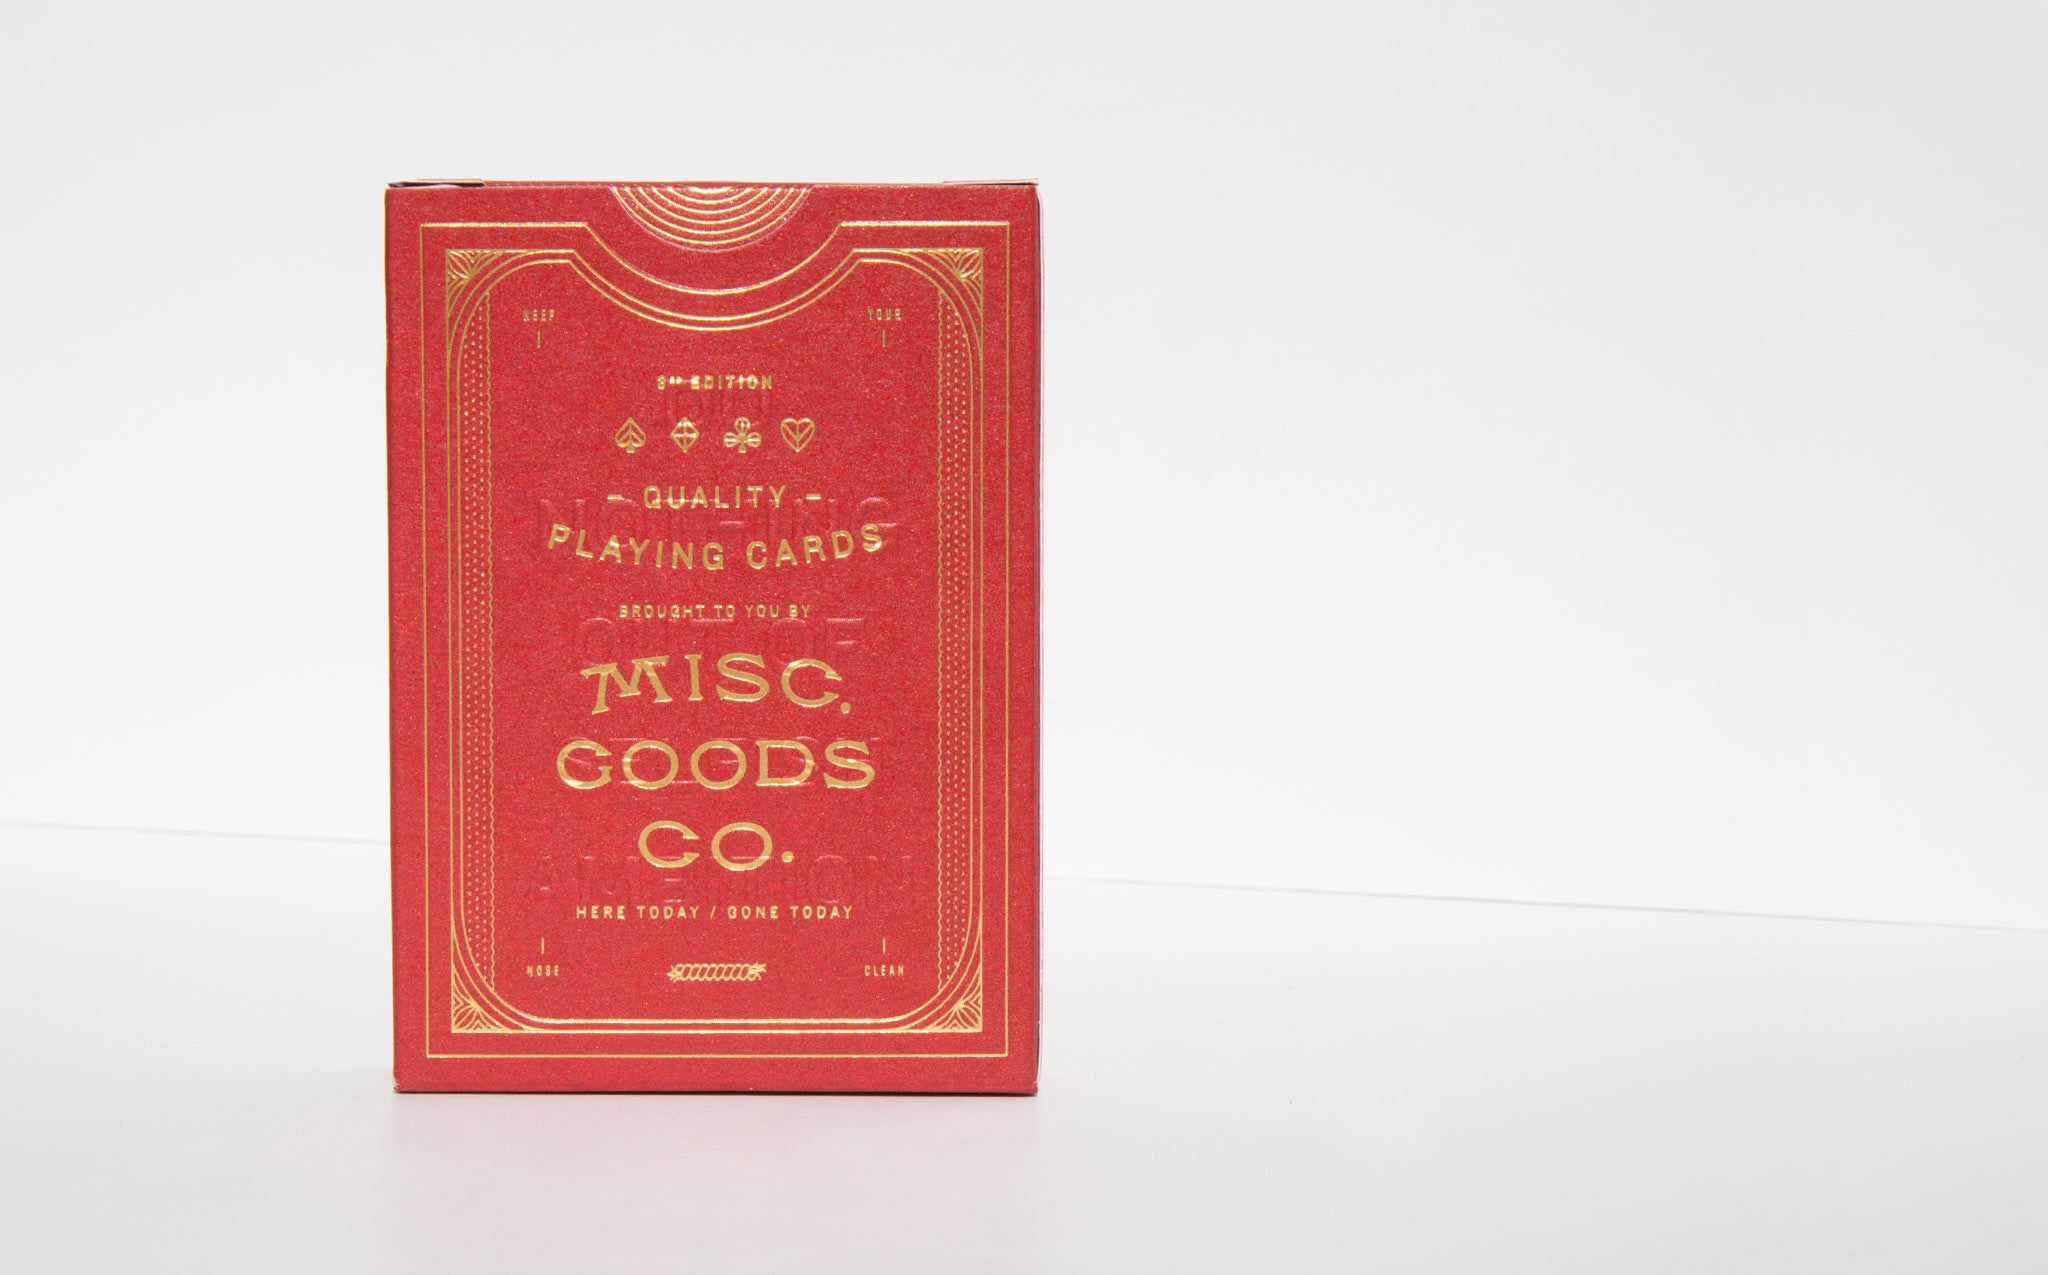 Misc Goods Co Playing Cards - Red